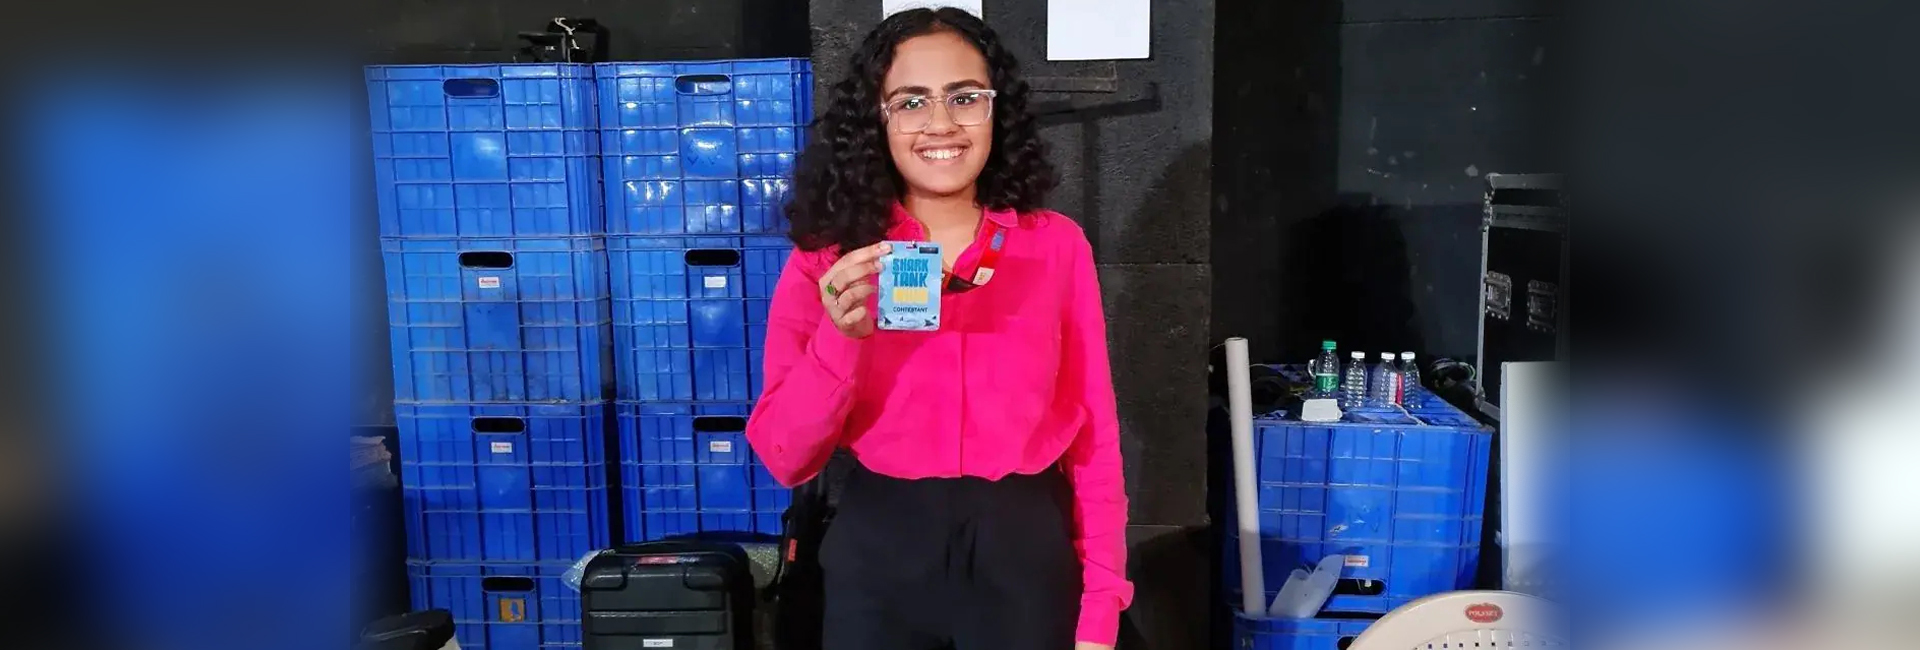 Anoushka Jolly: Youngest entrepreneur on Shark Tank India to win seed fund